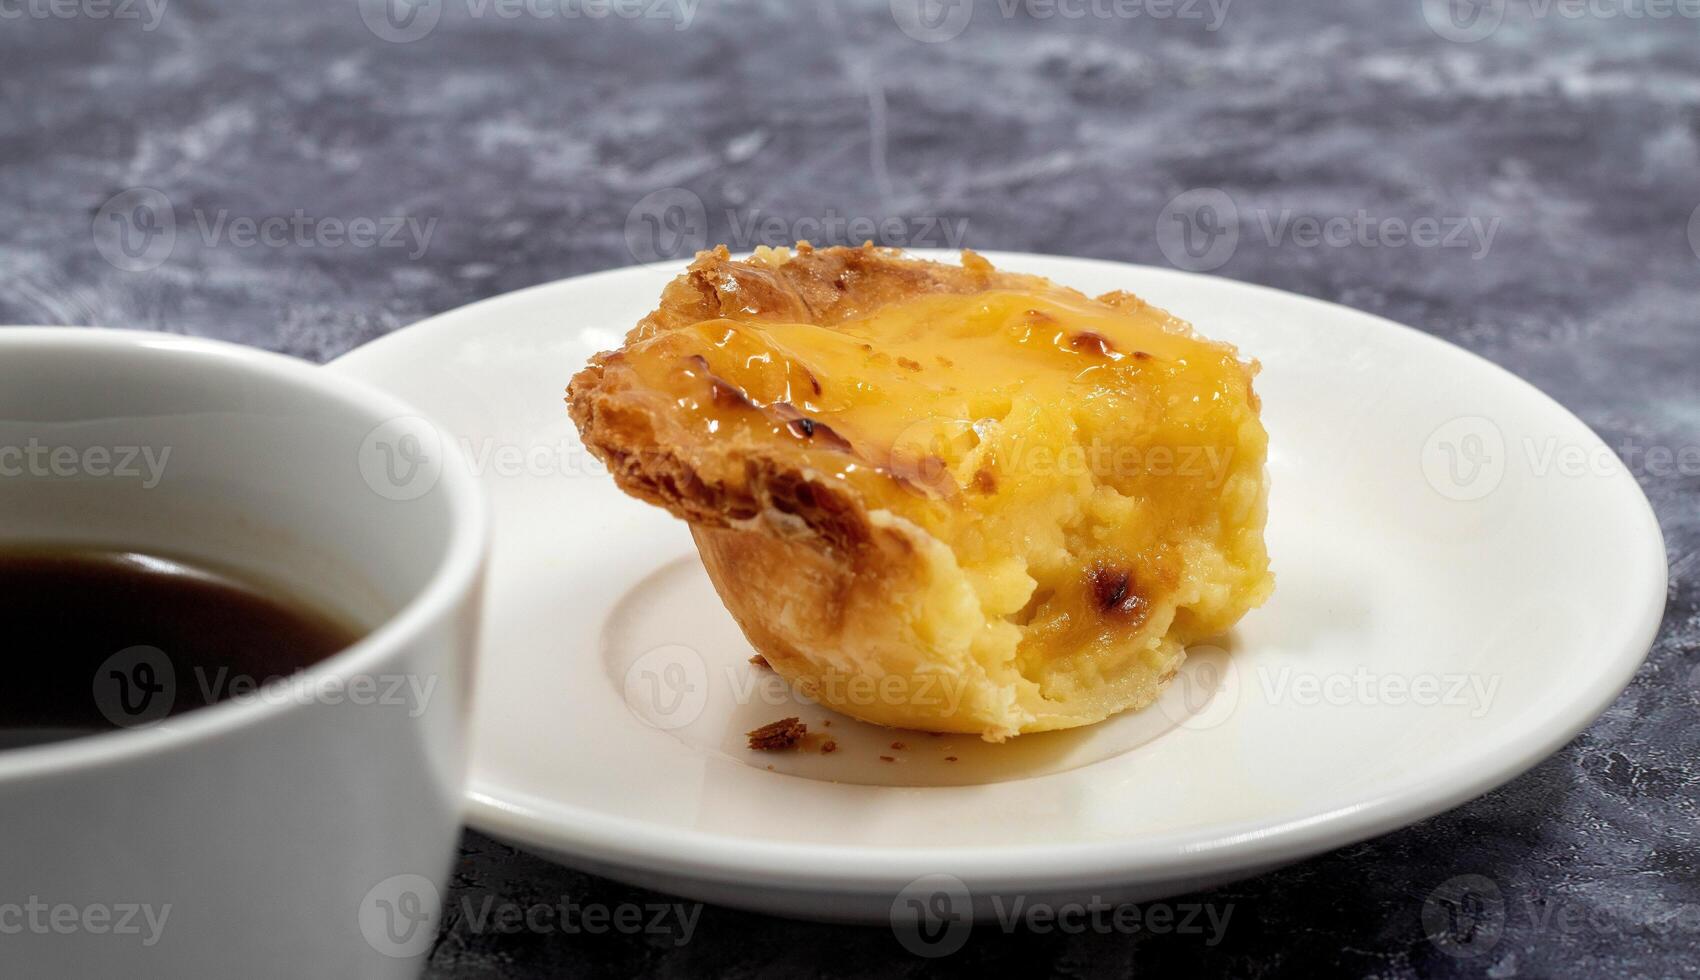 One uneaten Pastel de nata or Portuguese egg dessert on a white plate. Pastel de Belm is a small pie with a crispy puff pastry crust and a custard cream filling. Eating a small dessert, a cupcake. photo